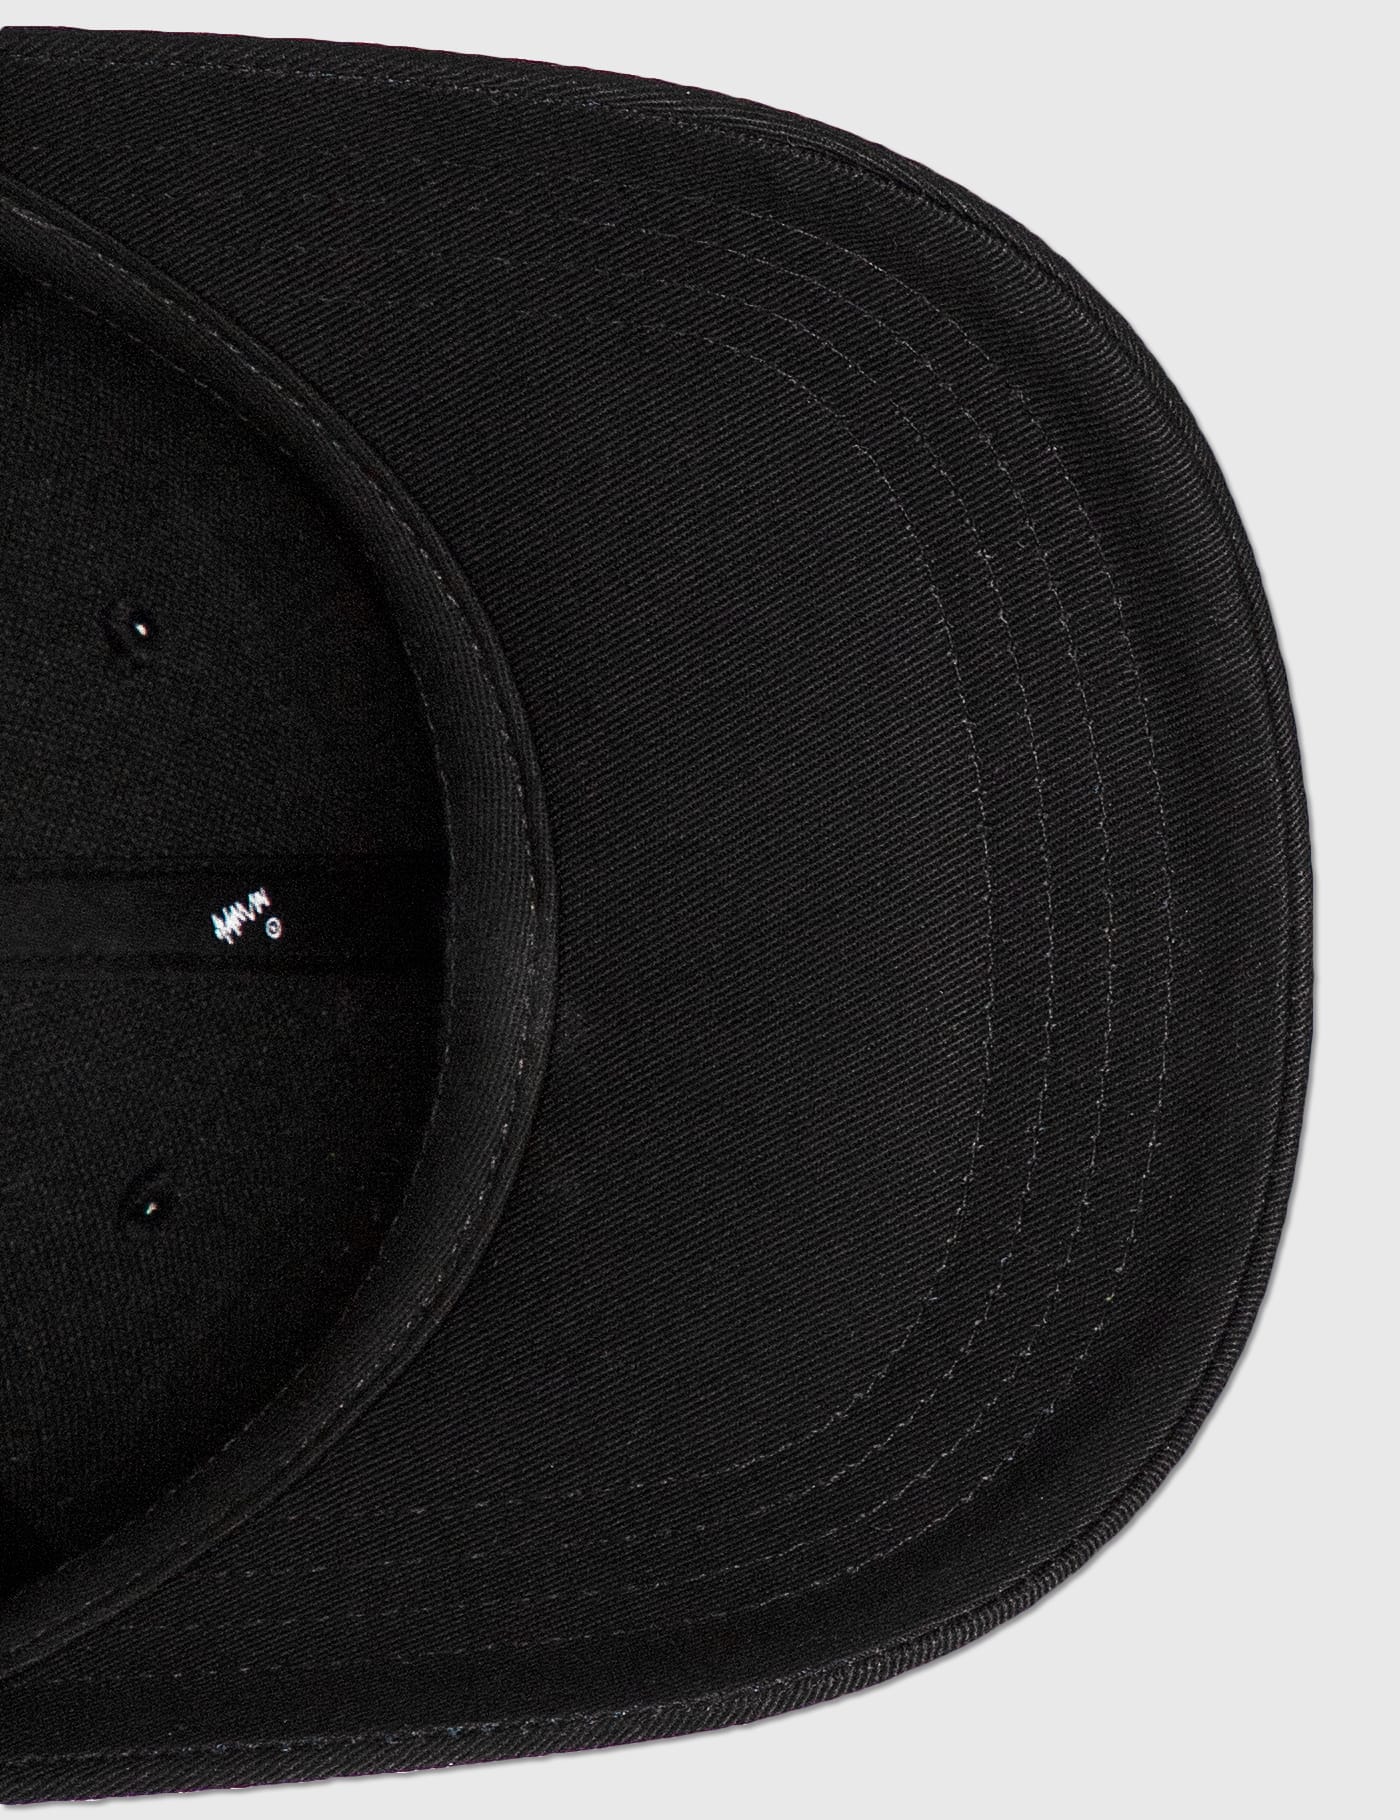 Ader Error - Distort Cap | HBX - Globally Curated Fashion and ...